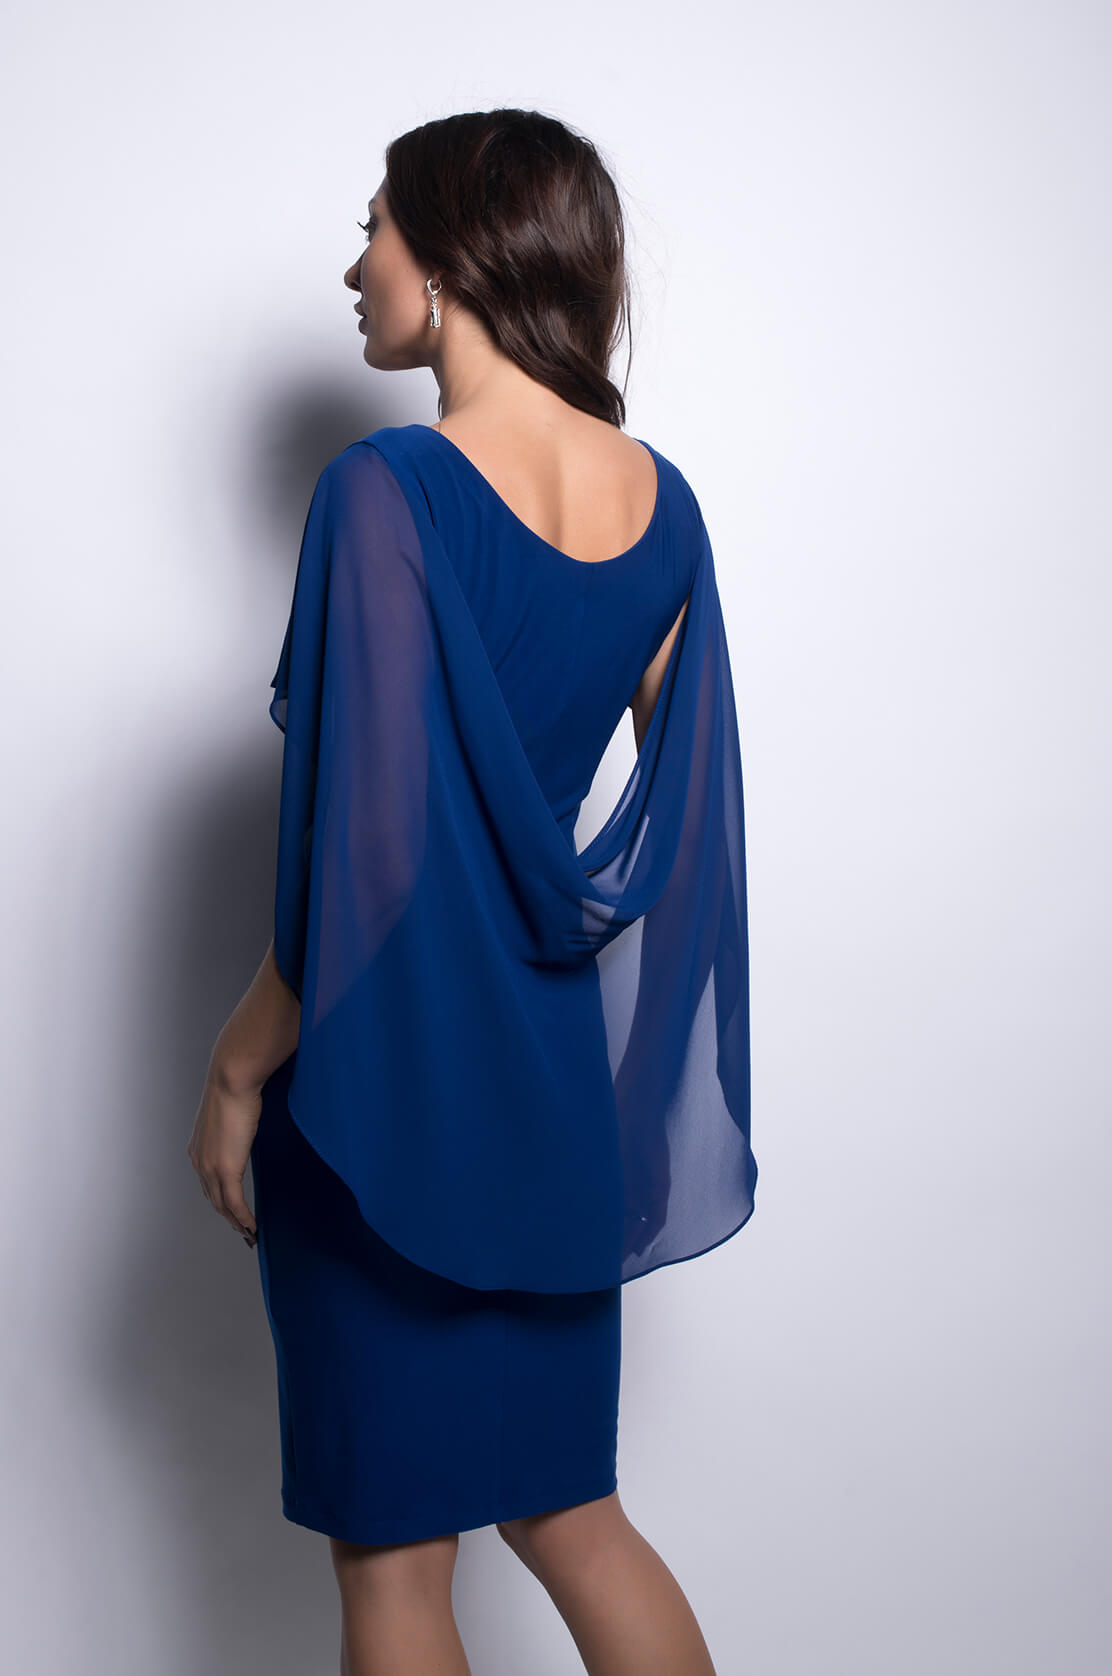 Chiffon & Diamante Dress in Imperial Blue 209228 - After Hours Boutique